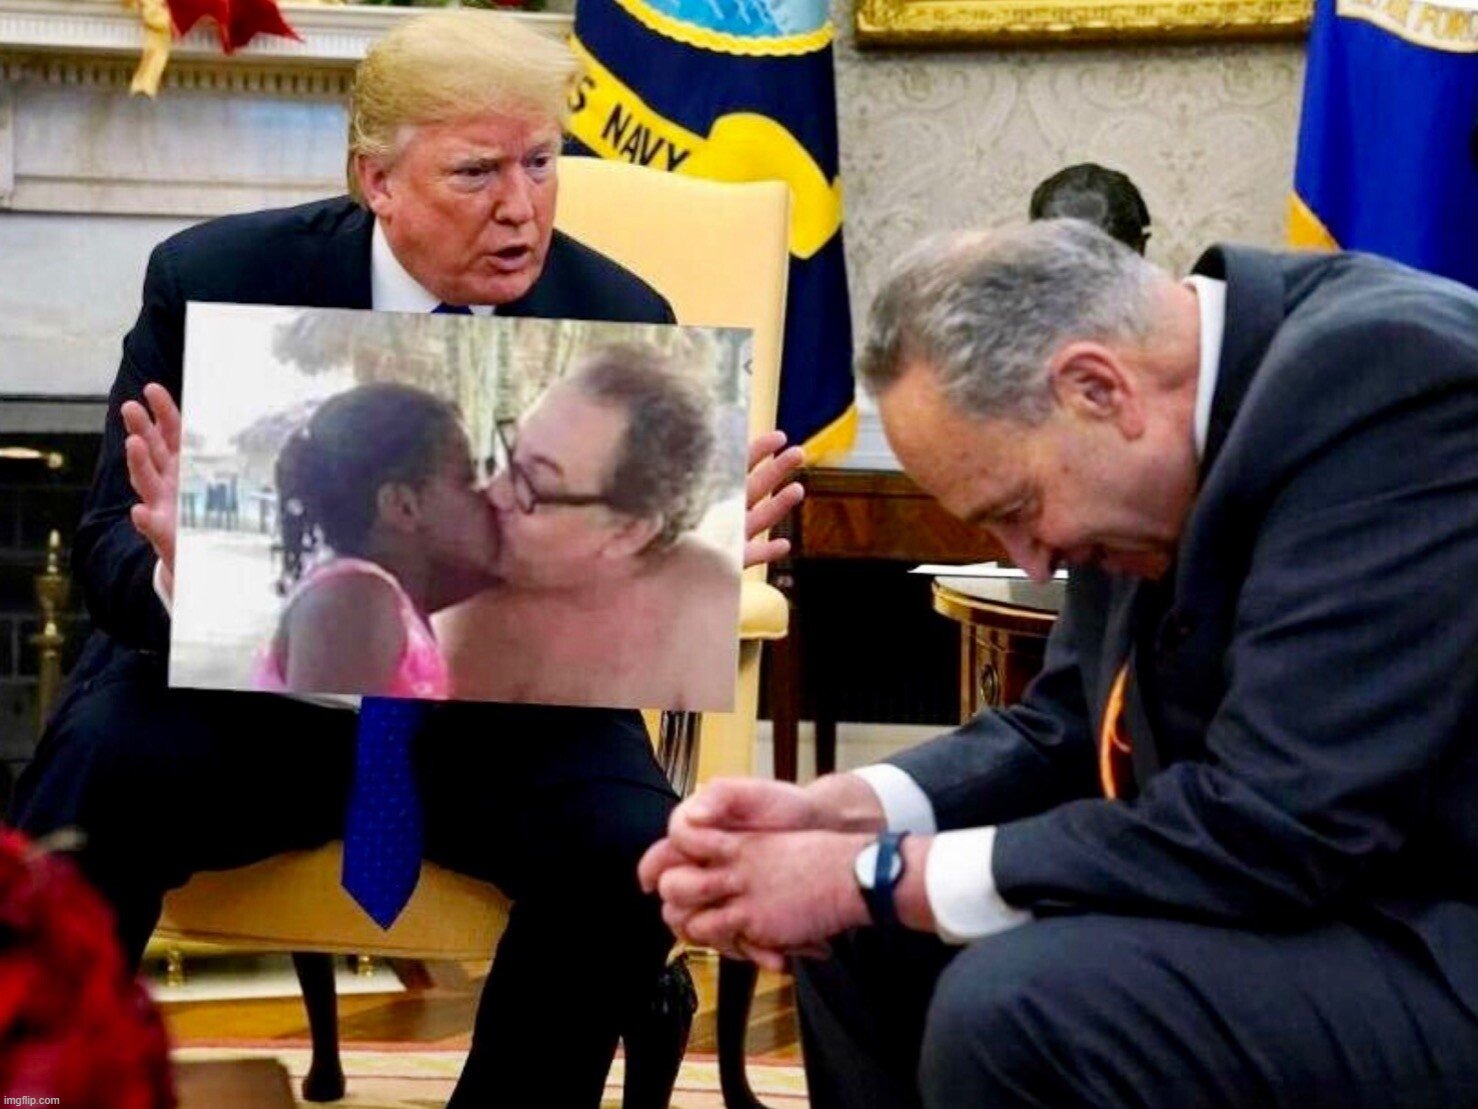 Sorry, Chuck. We have our doubts about you. | image tagged in chuck schumer,senate,trump,democrats,pedophiles,little girl | made w/ Imgflip meme maker